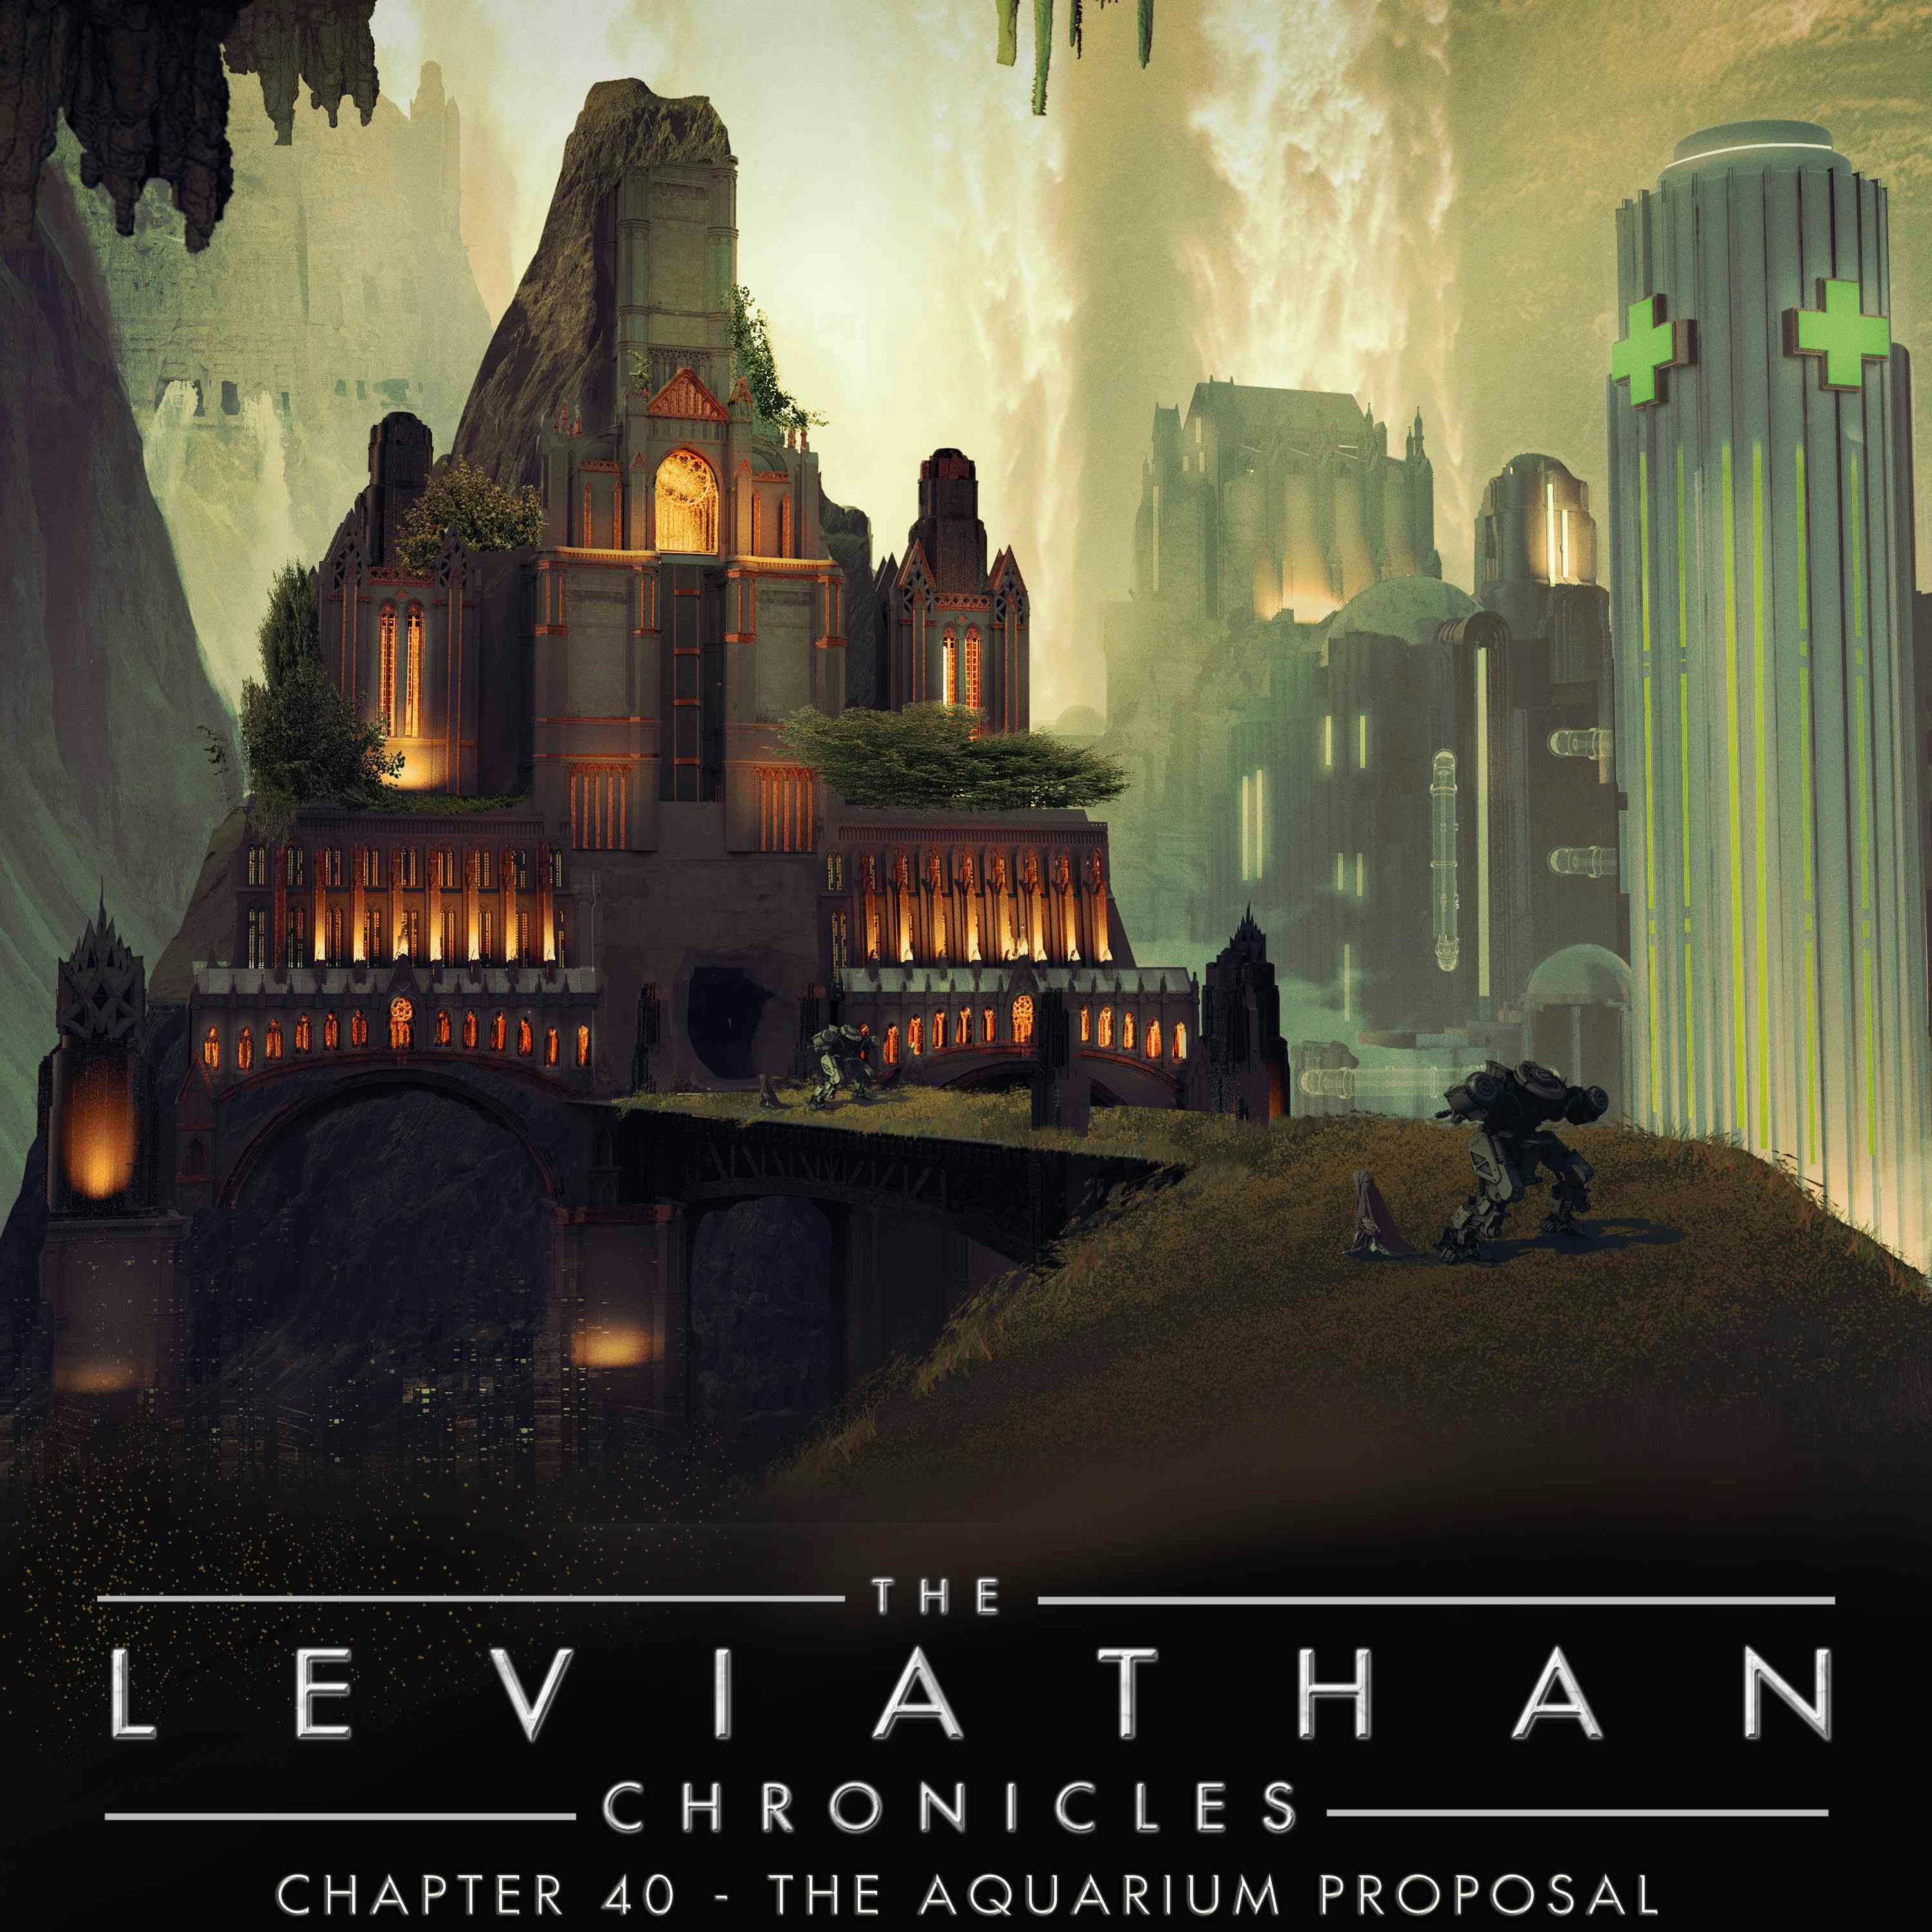 The Leviathan Chronicles | Chapter 40 - The Aquarium Proposal